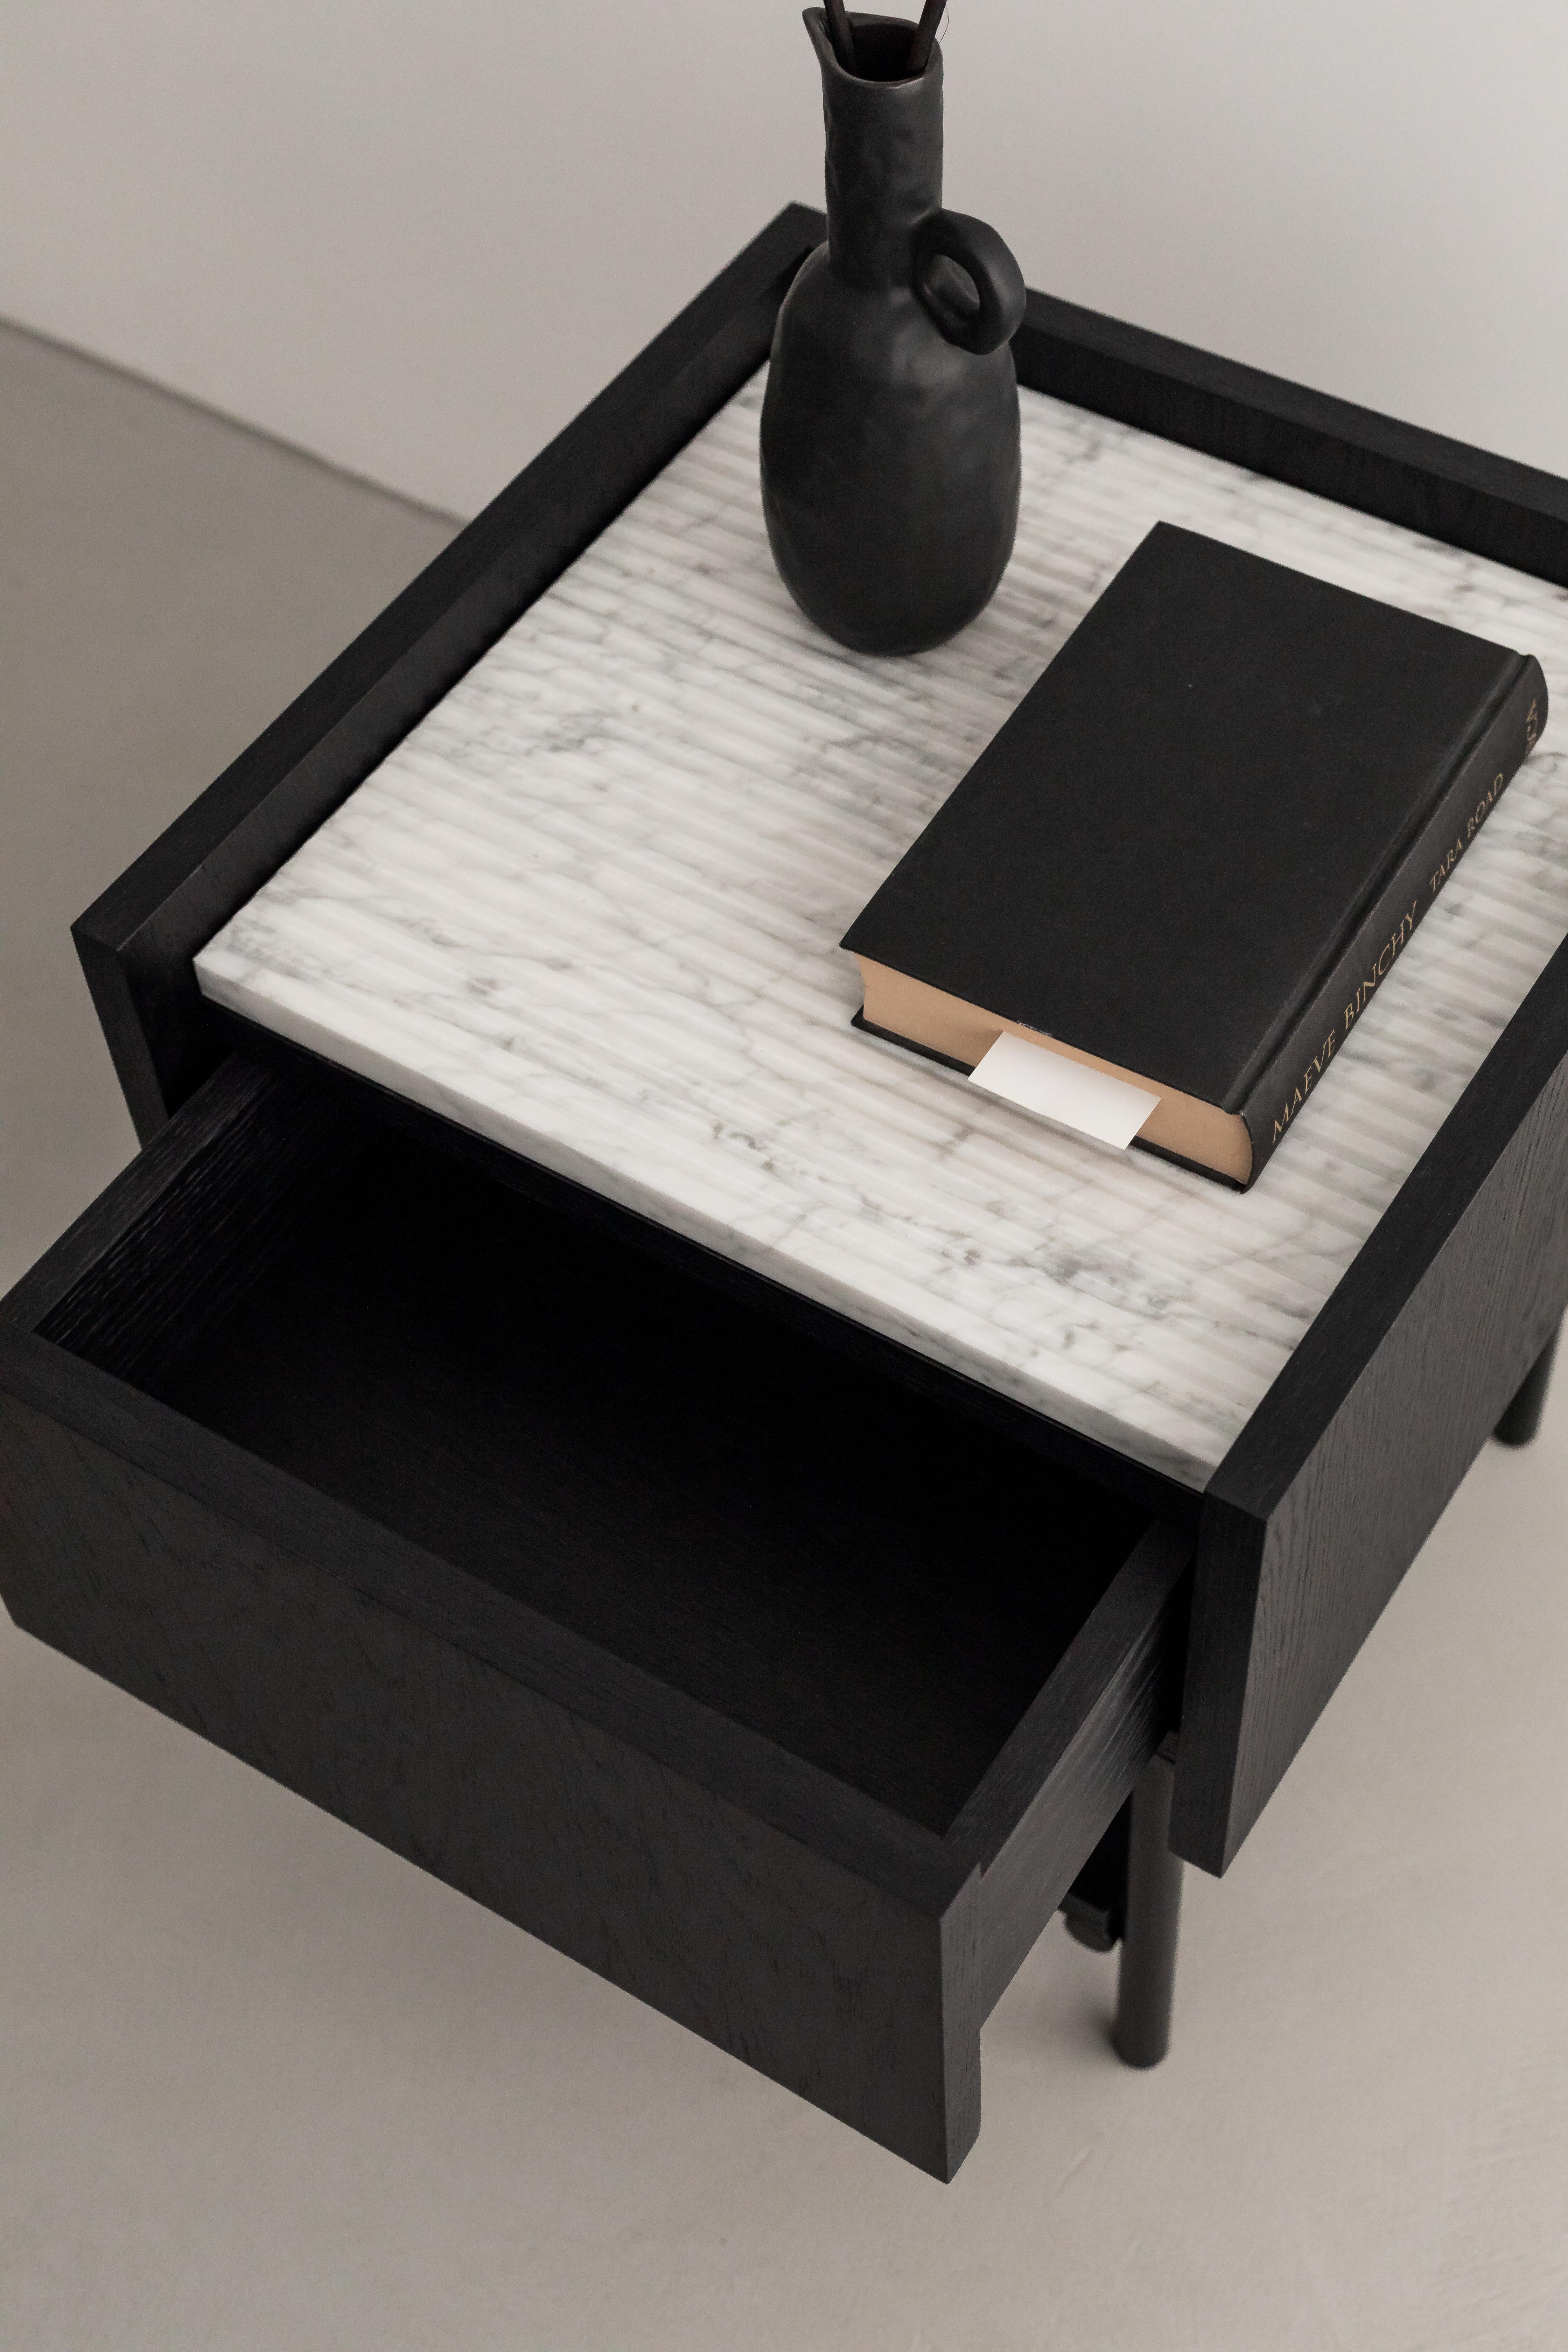 FORST NIGHT STAND is an elegant bedside table with a marble top and a comfortable drawer opened with the TIP ON system. The open shelf will allow you to conveniently store things that should always be at hand. The top of the table is finished with